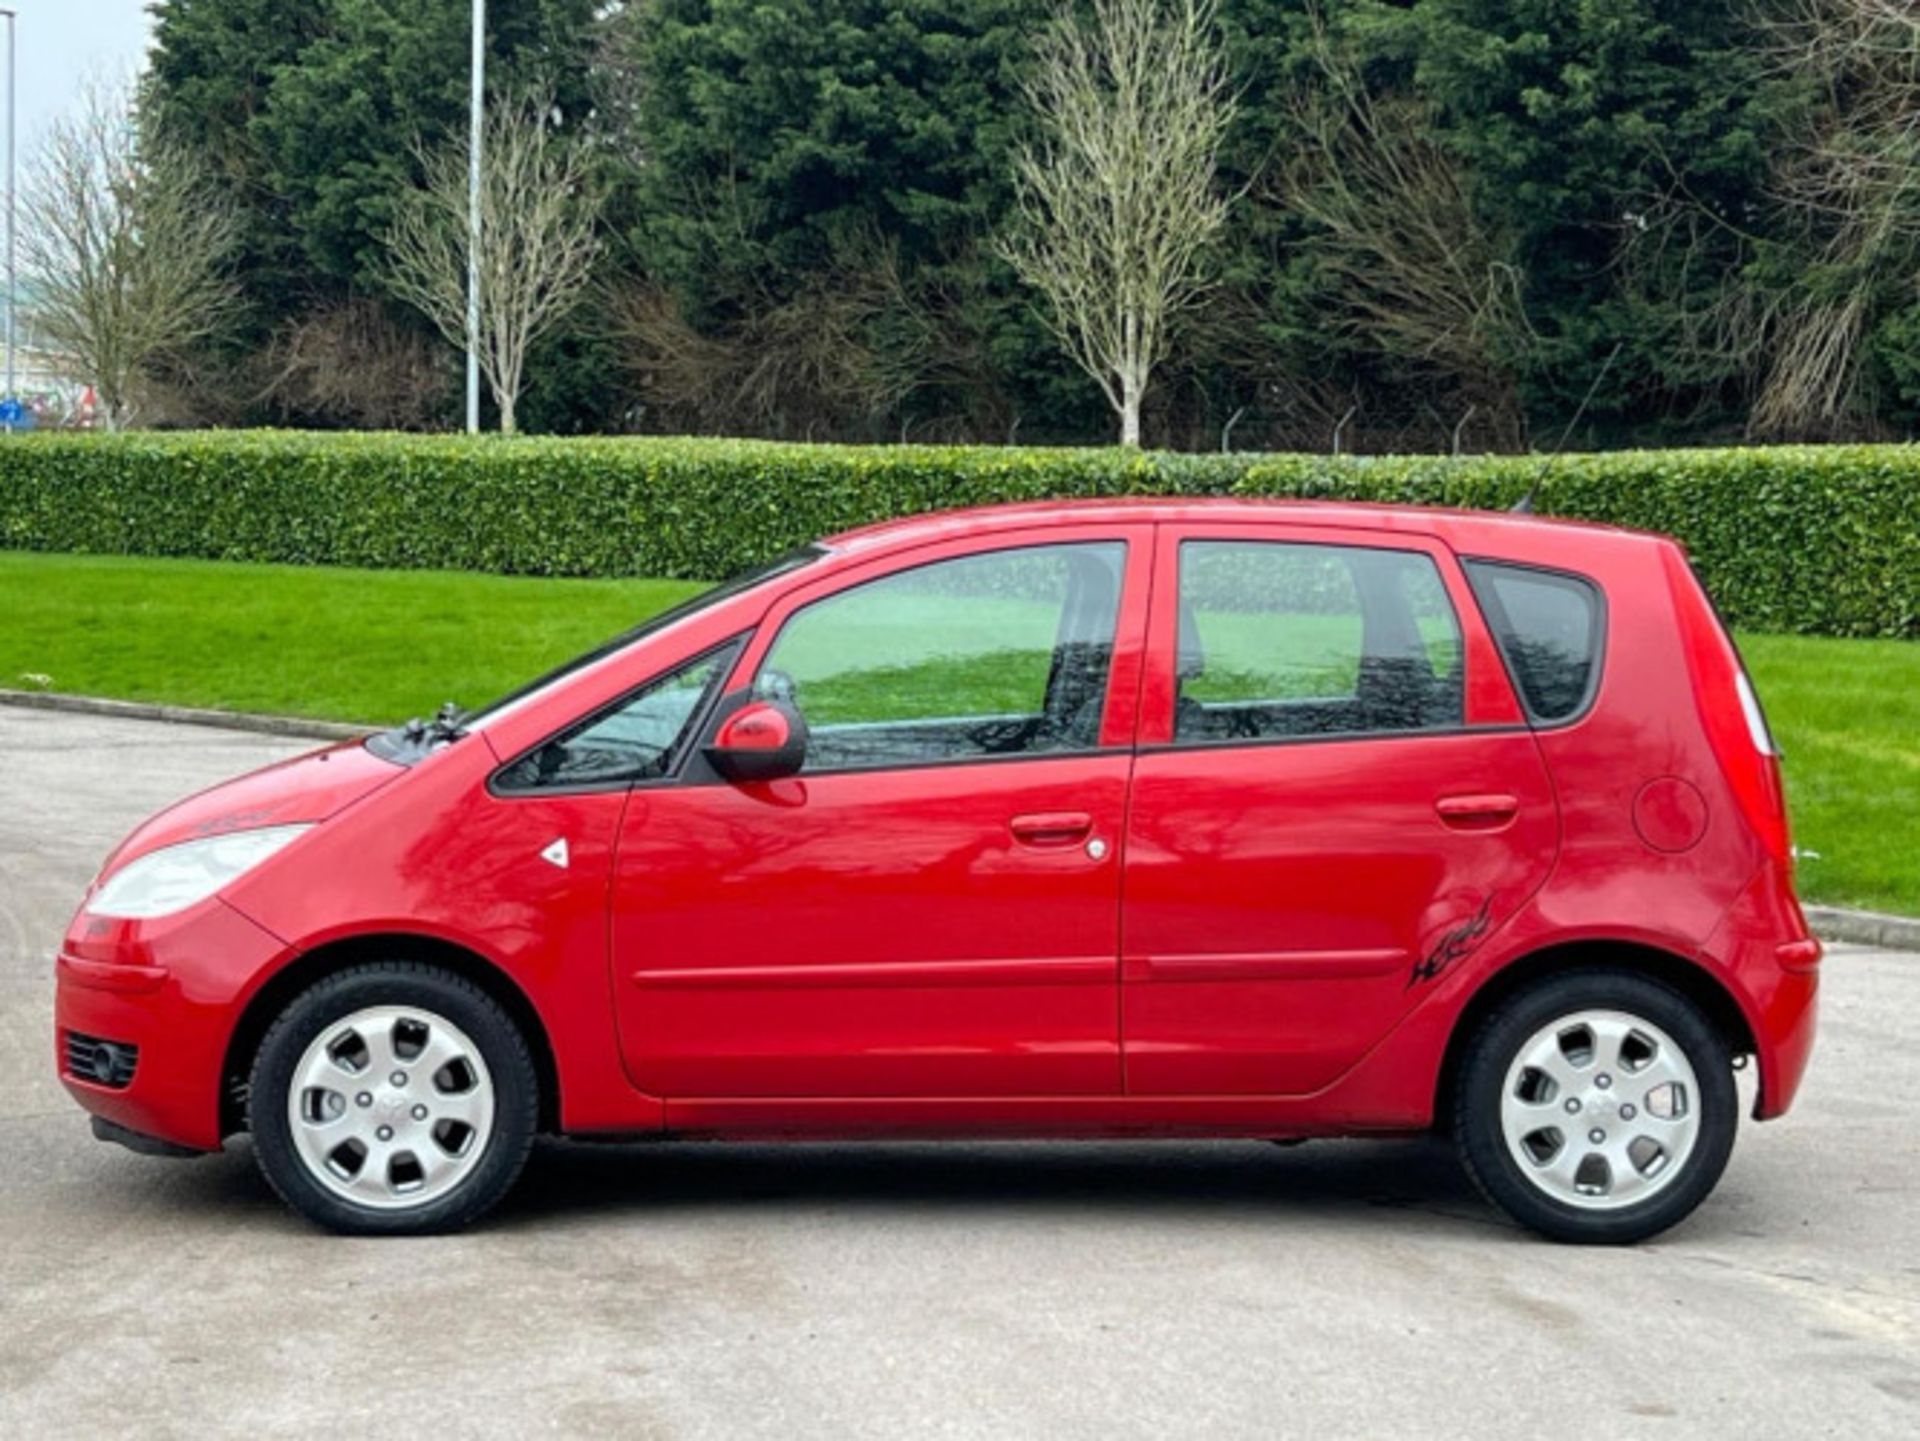 2007 MITSUBISHI COLT 1.5 DI-D DIESEL AUTOMATIC >>--NO VAT ON HAMMER--<< - Image 116 of 127